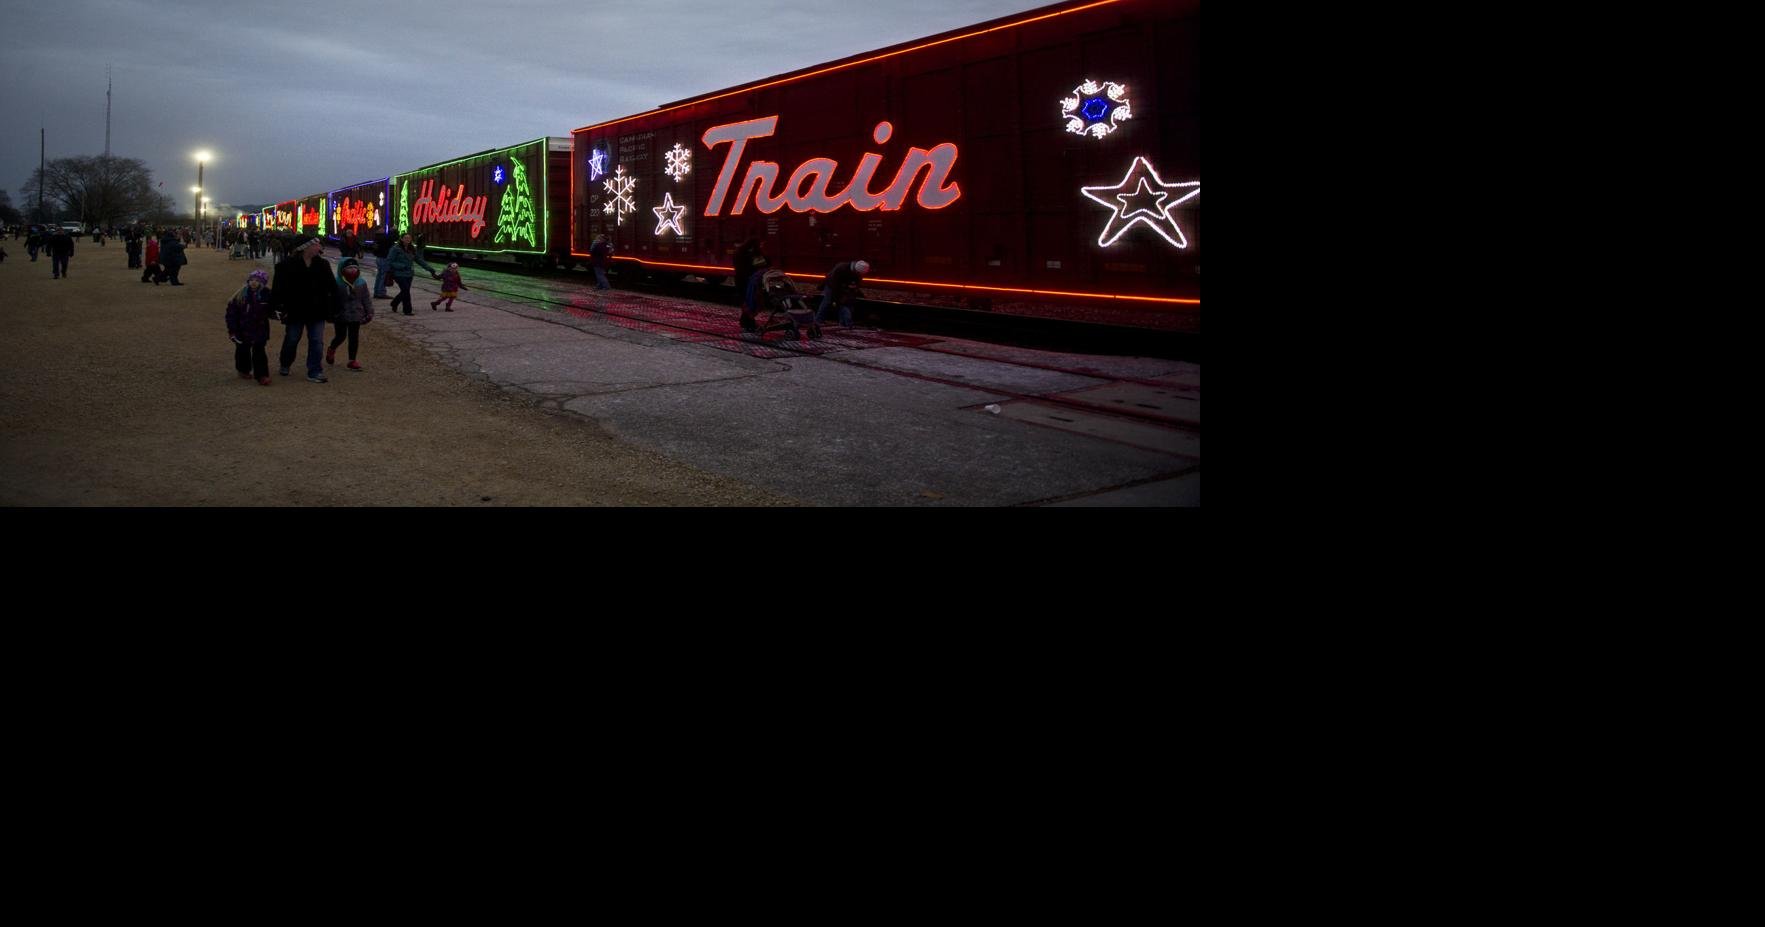 Holiday Train to stop Wednesday in La Crosse